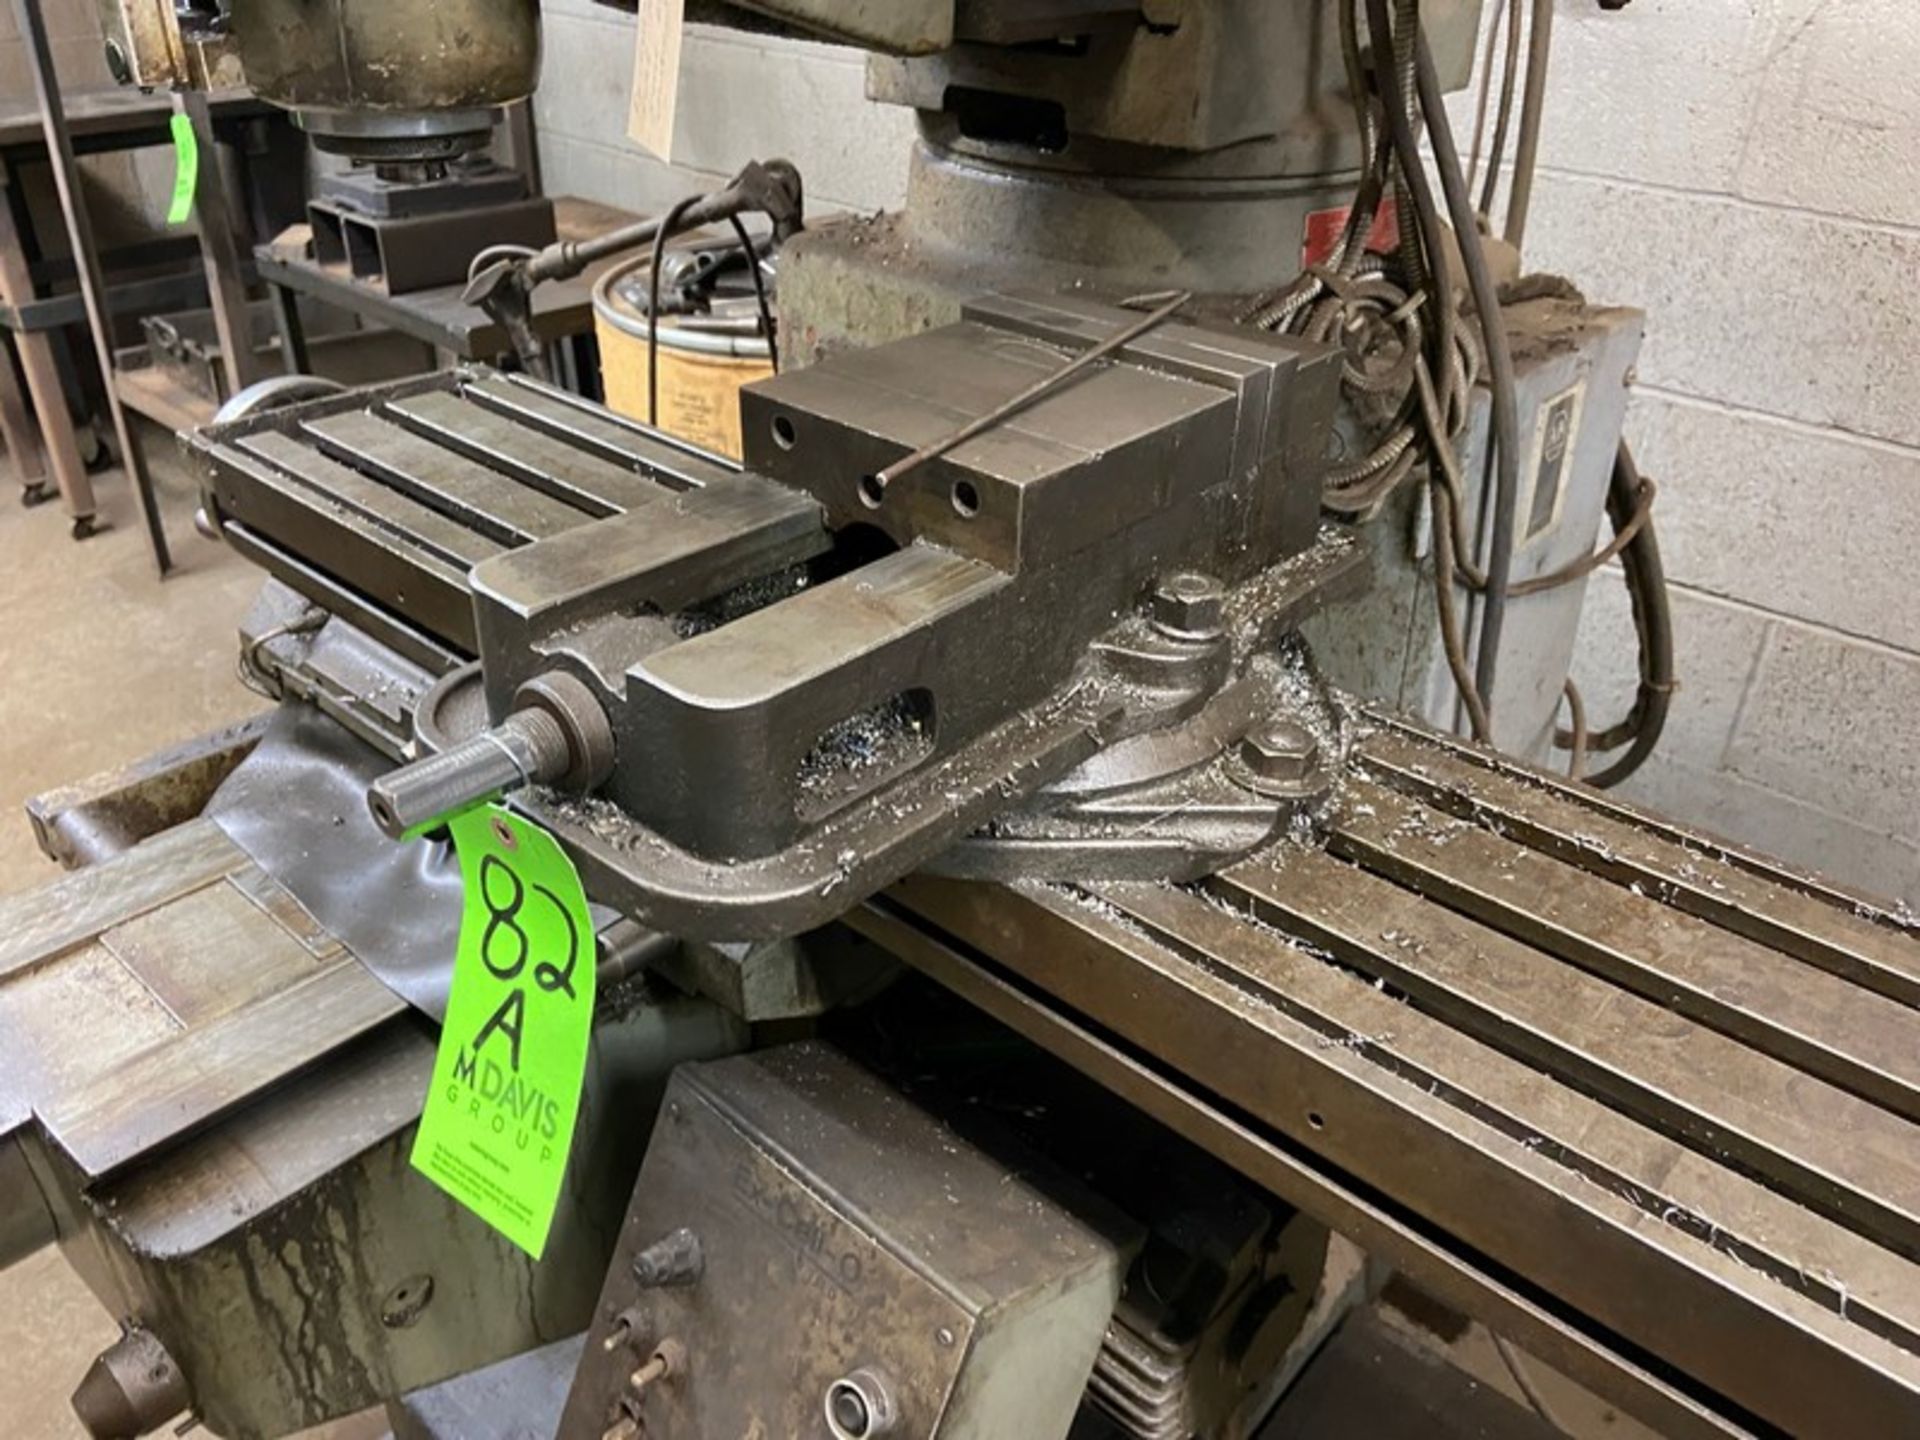 Precision Machine Vise, S/N B85188 (LOCATED IN CORRY, PA) - Image 2 of 3